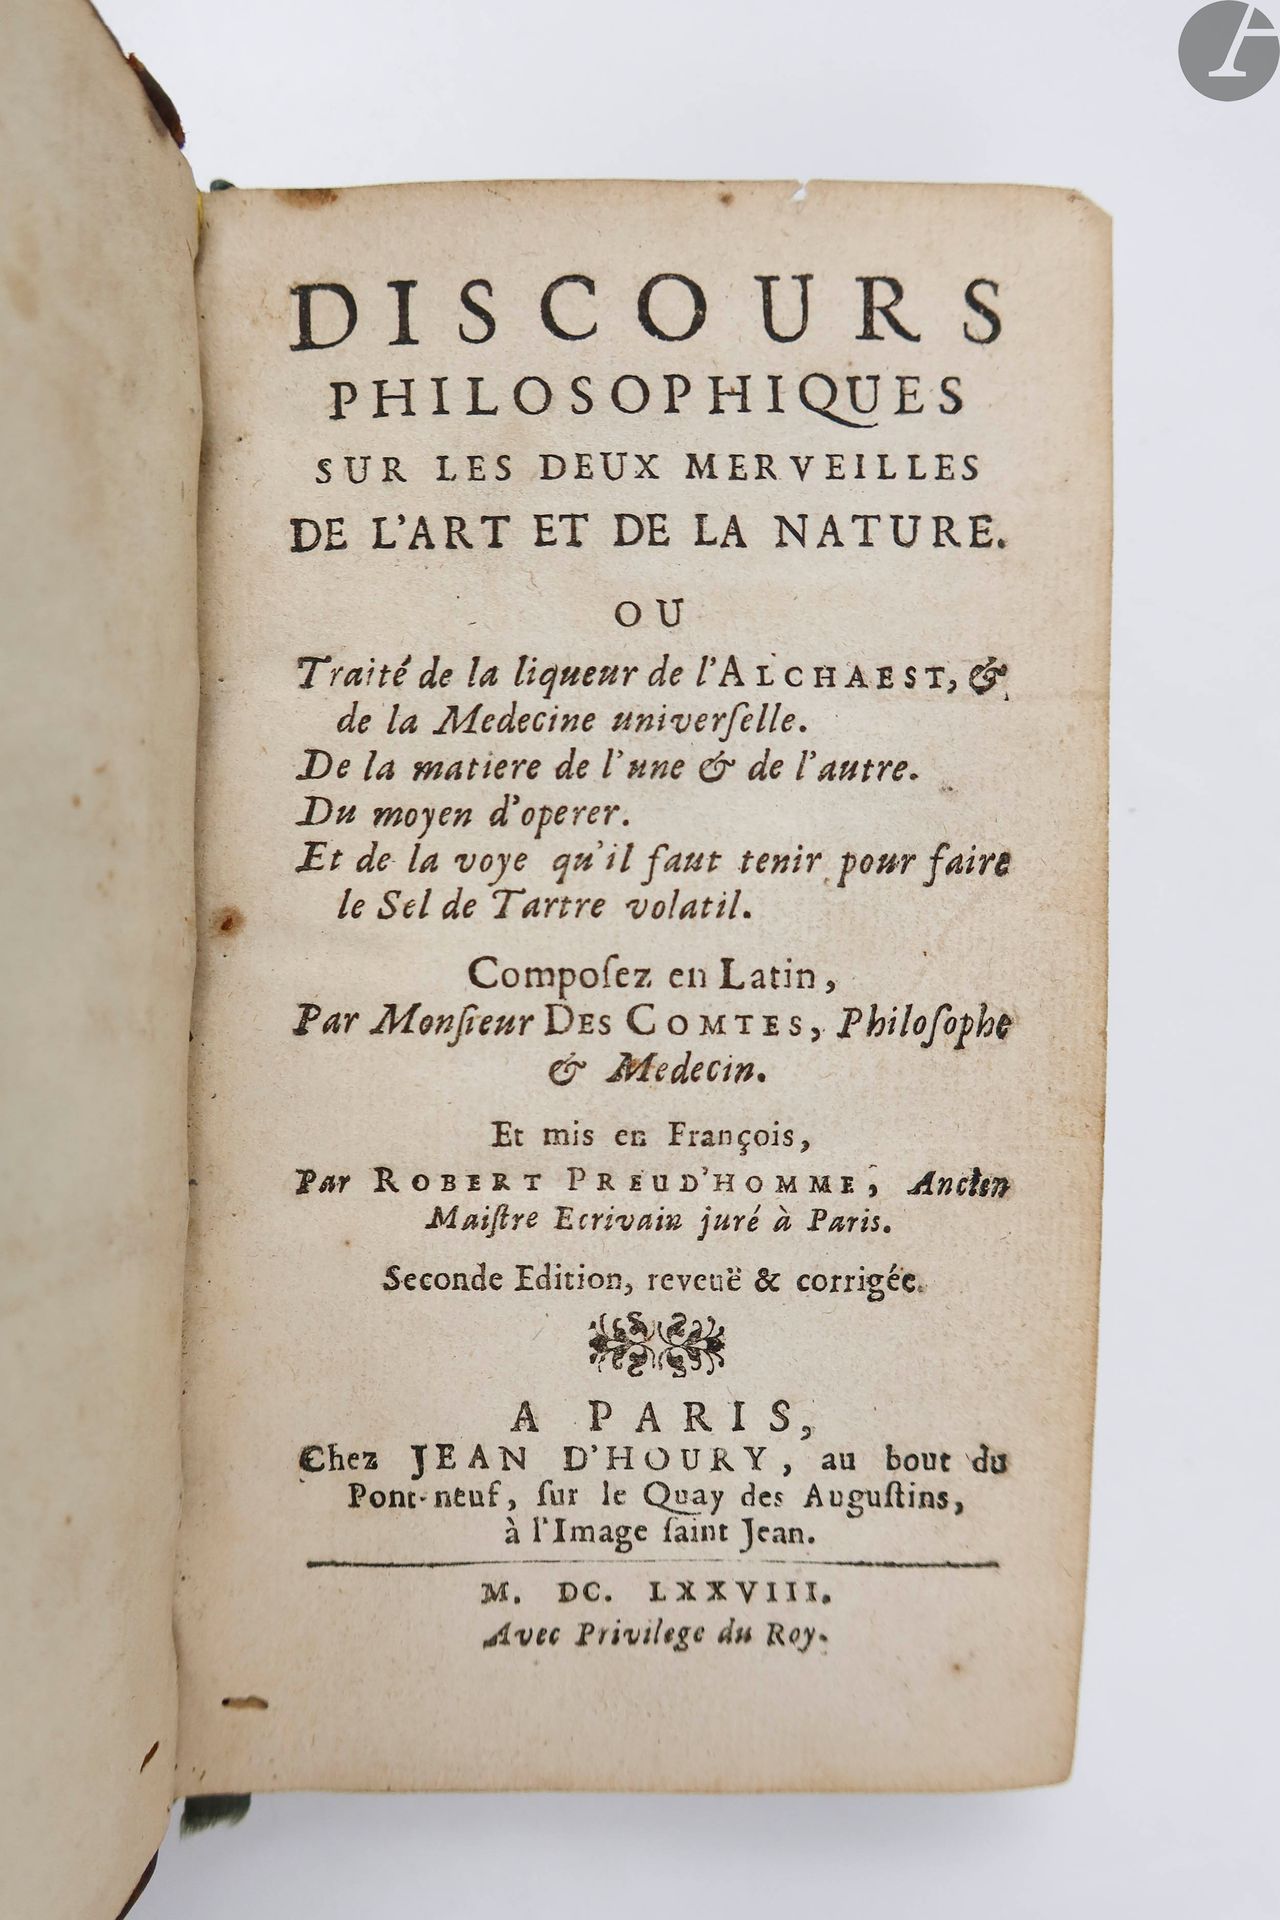 Null CONTI (Ludovico).
Philosophical discourses on the two wonders of art and na&hellip;